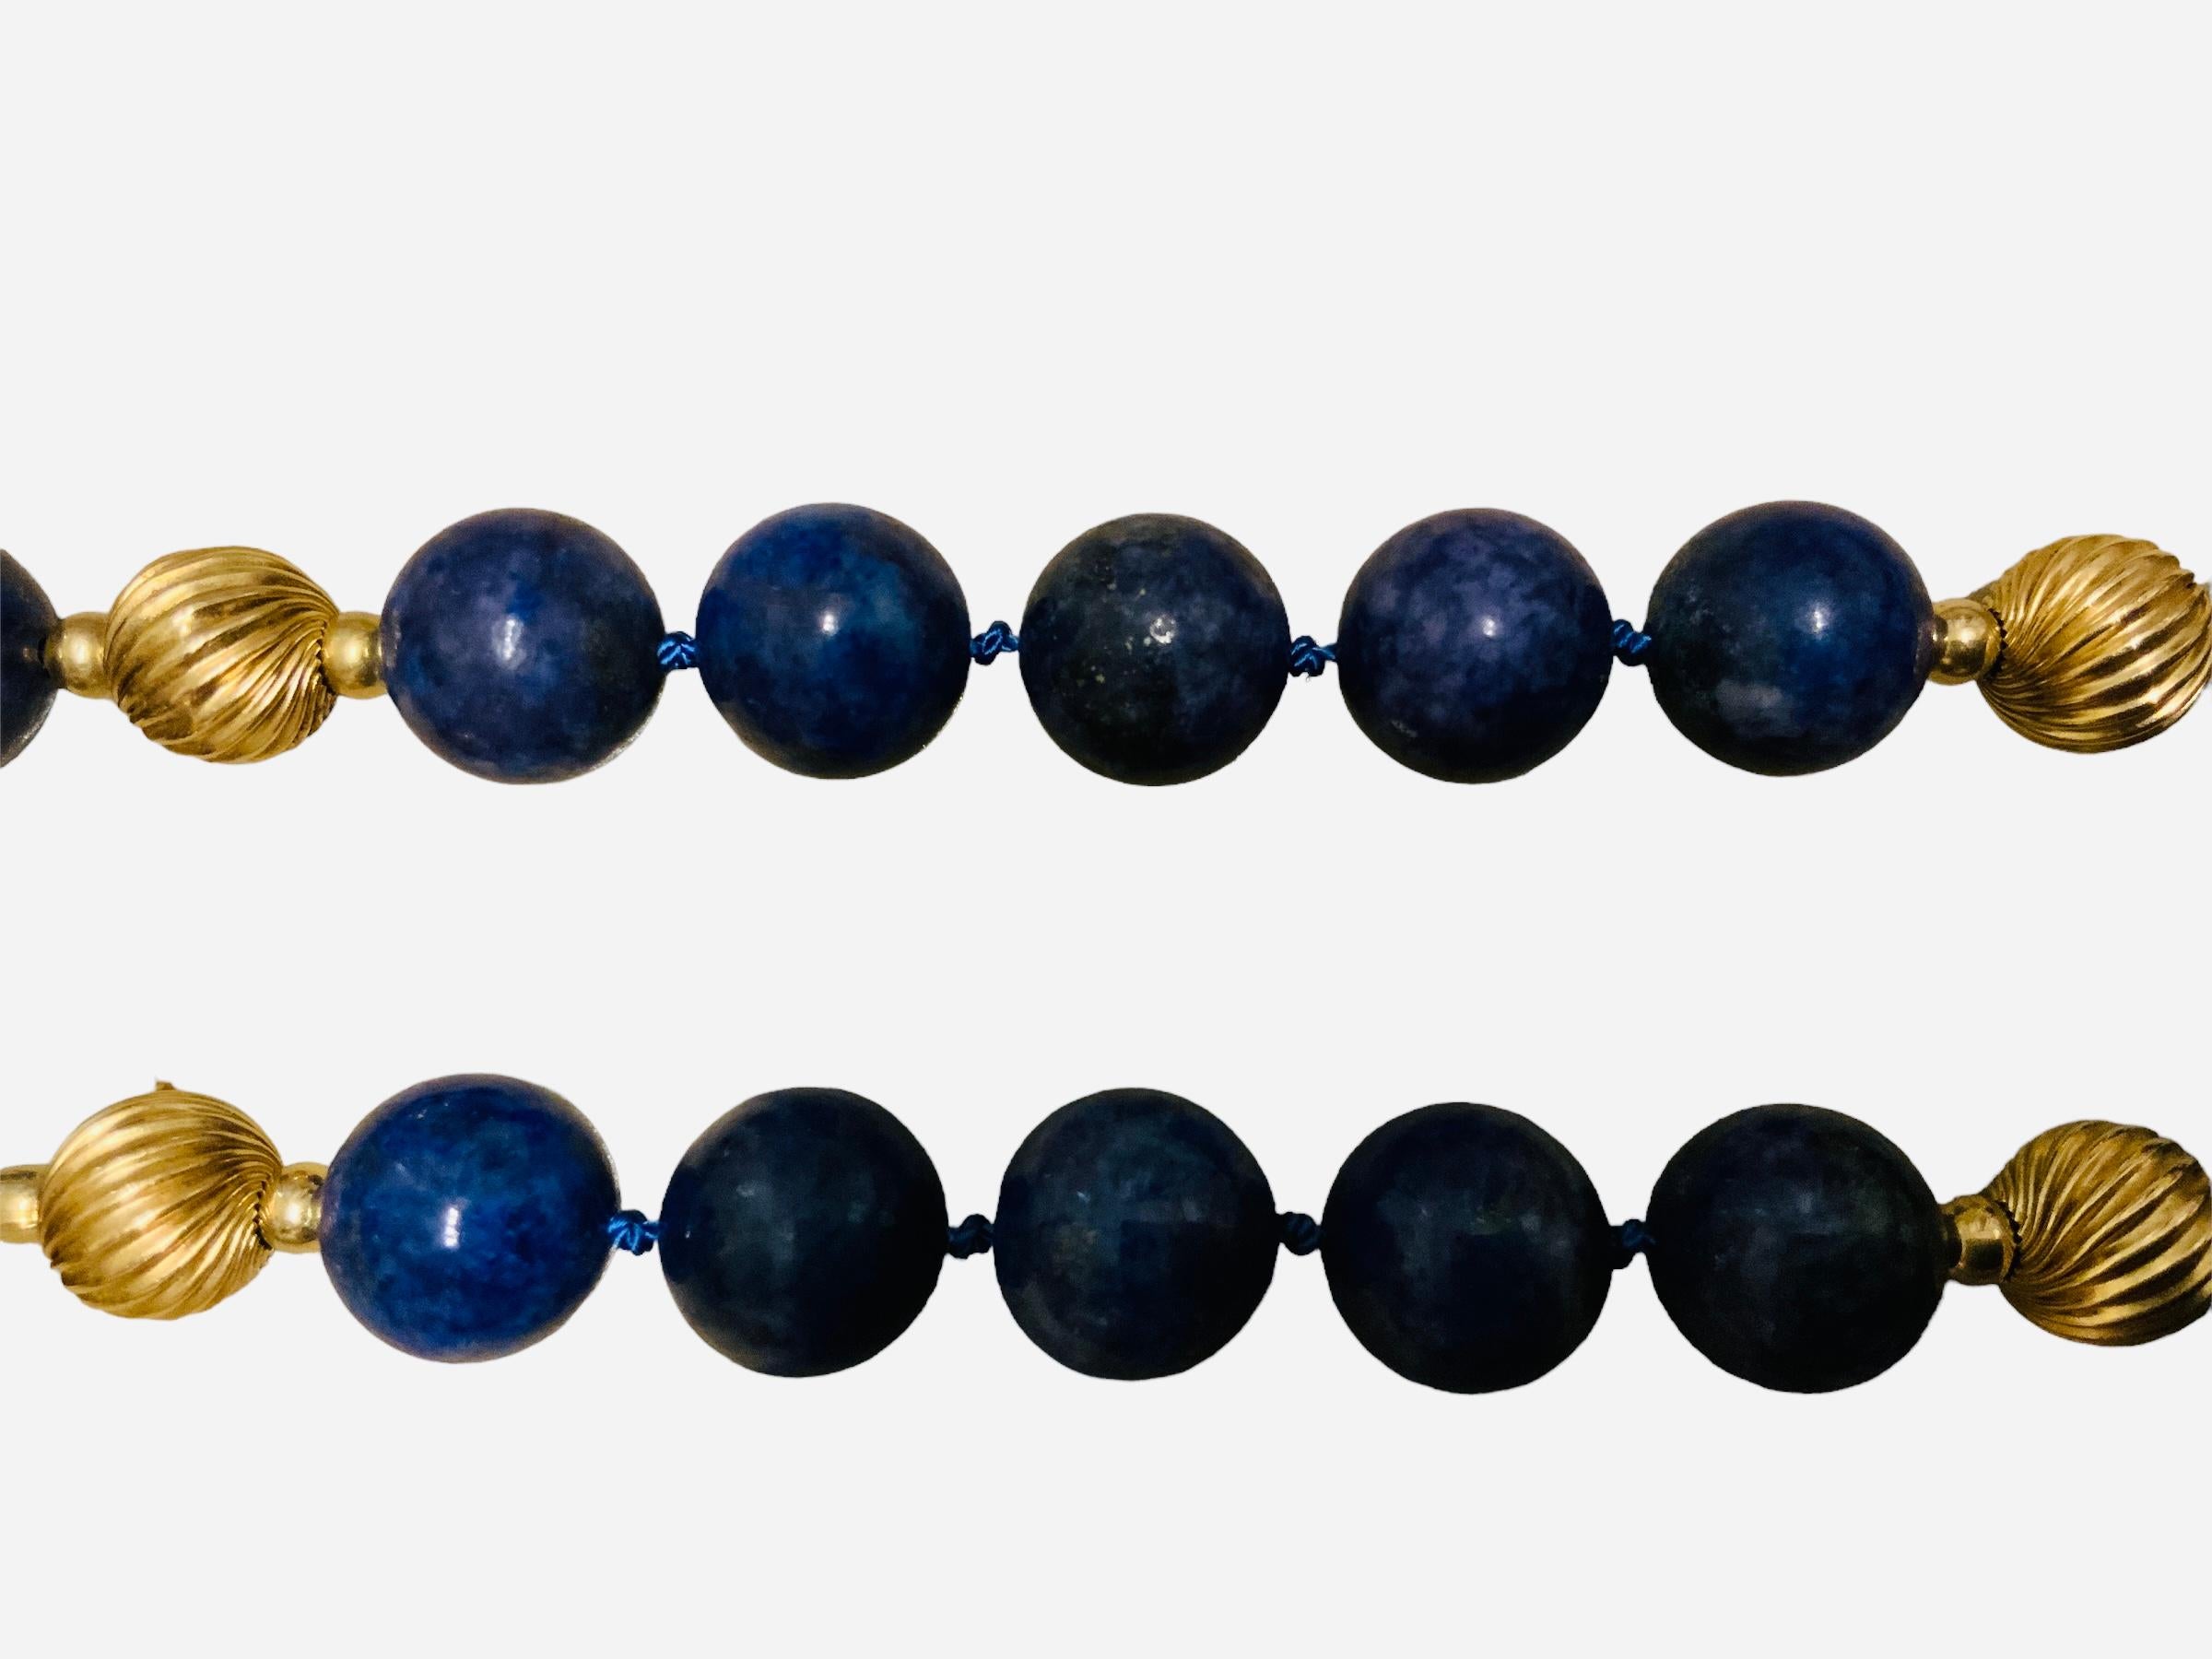 Lapis Lazuli And Gold Beads Necklace  In Good Condition For Sale In Guaynabo, PR